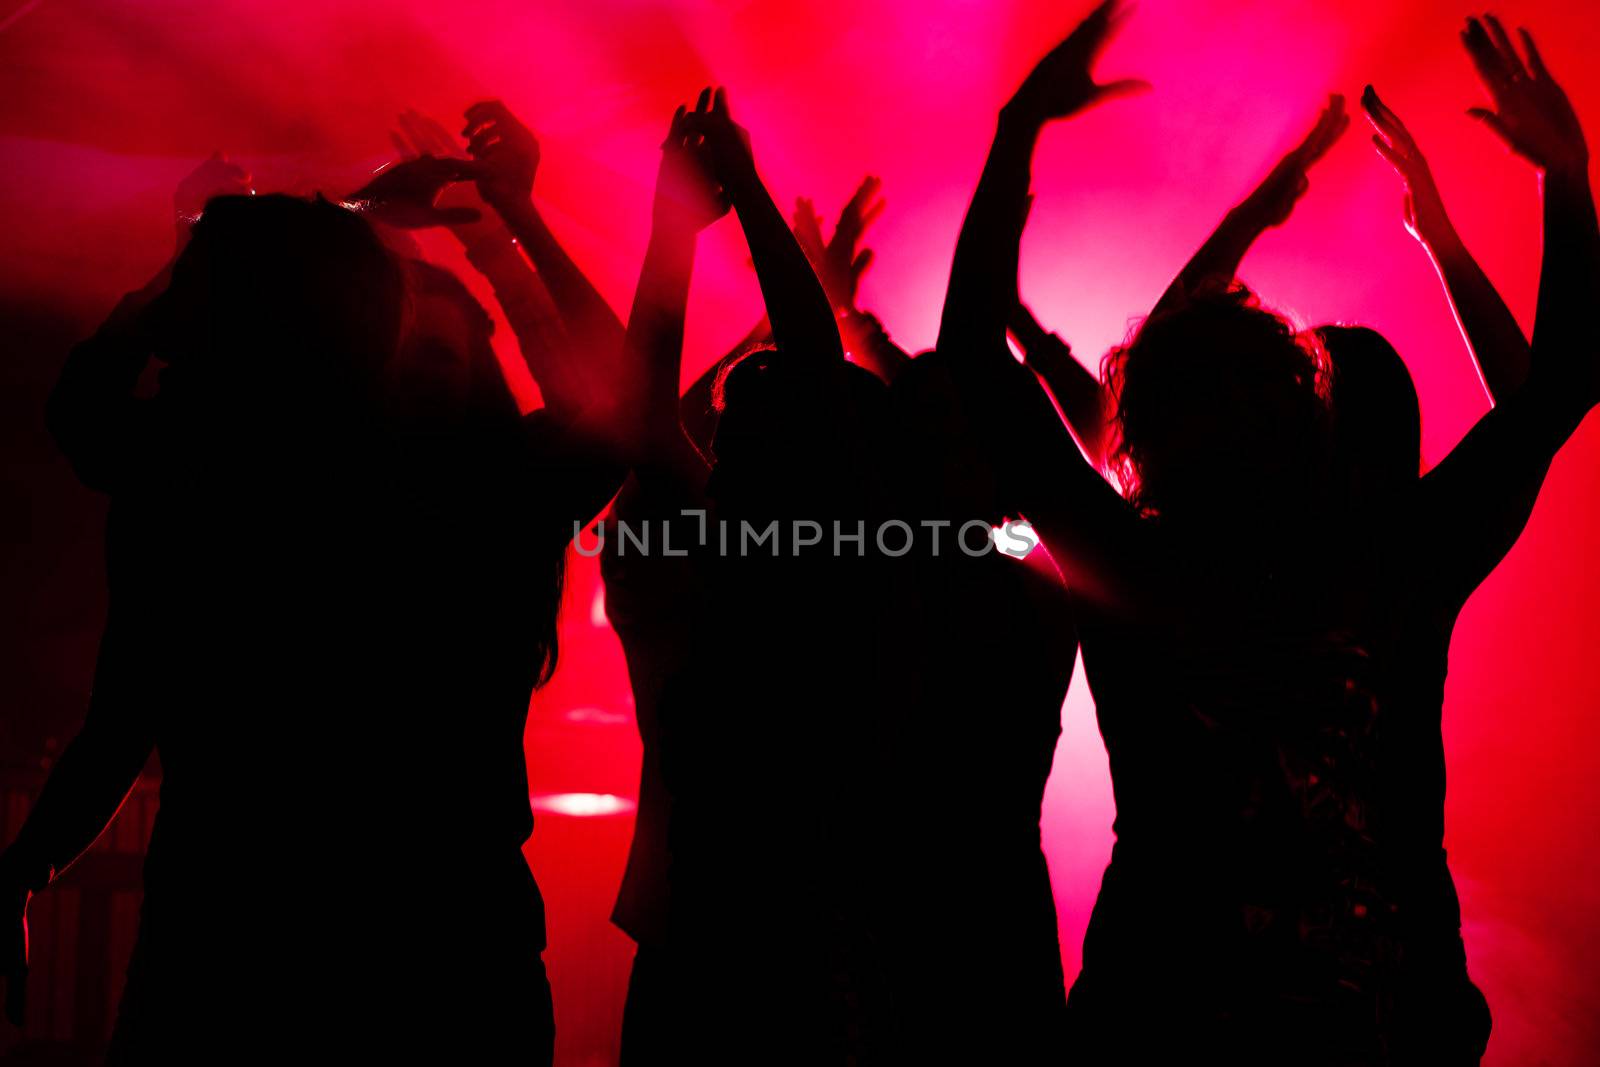 Silhouettes of dancing people having a celebration in a disco club, light is shining through the silhouettes of people